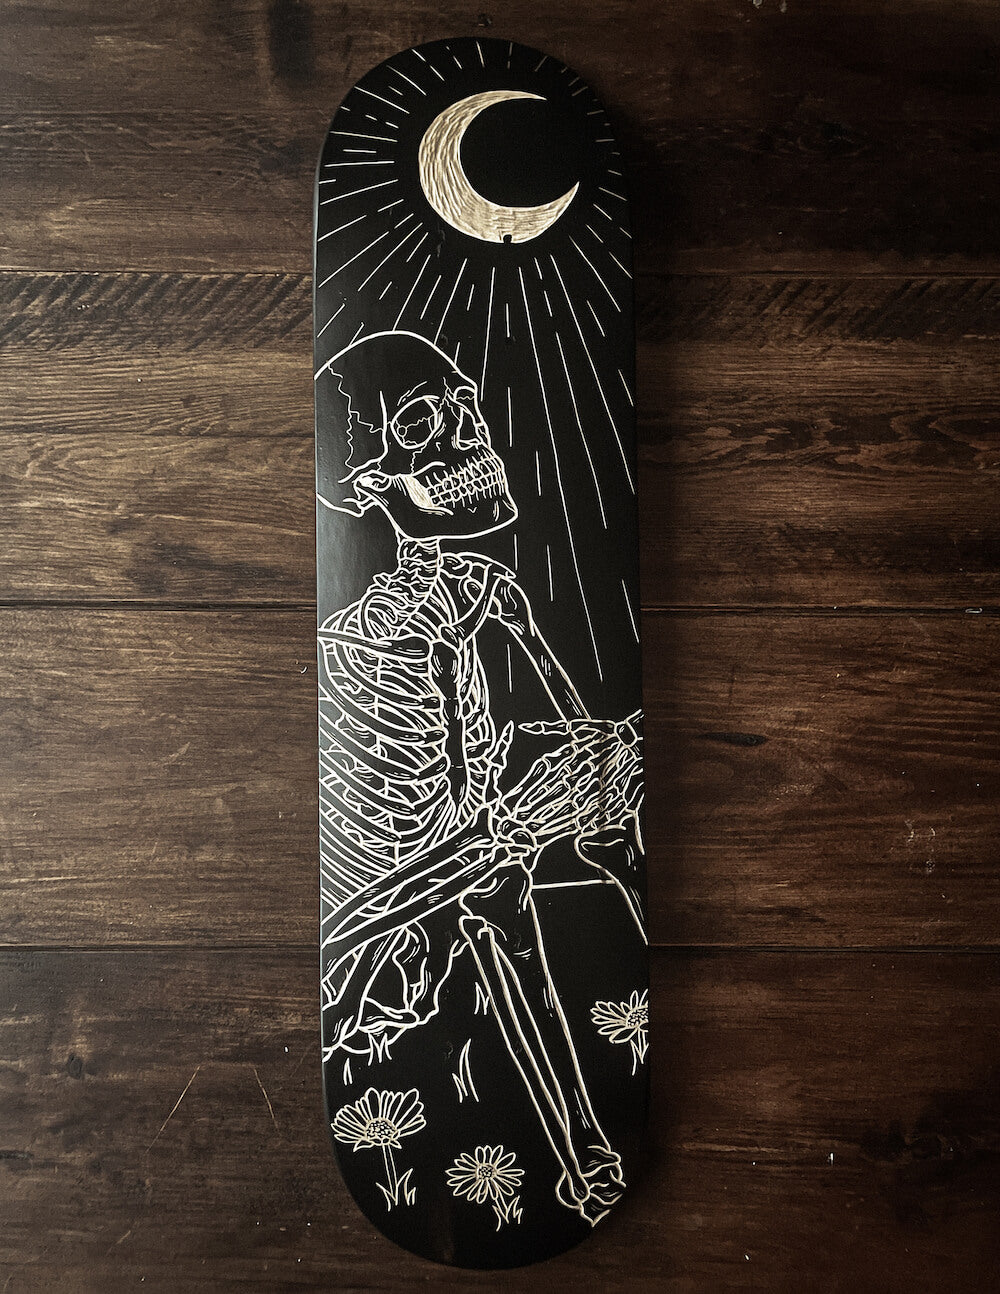 The Skeleton and the Moon Skate Deck